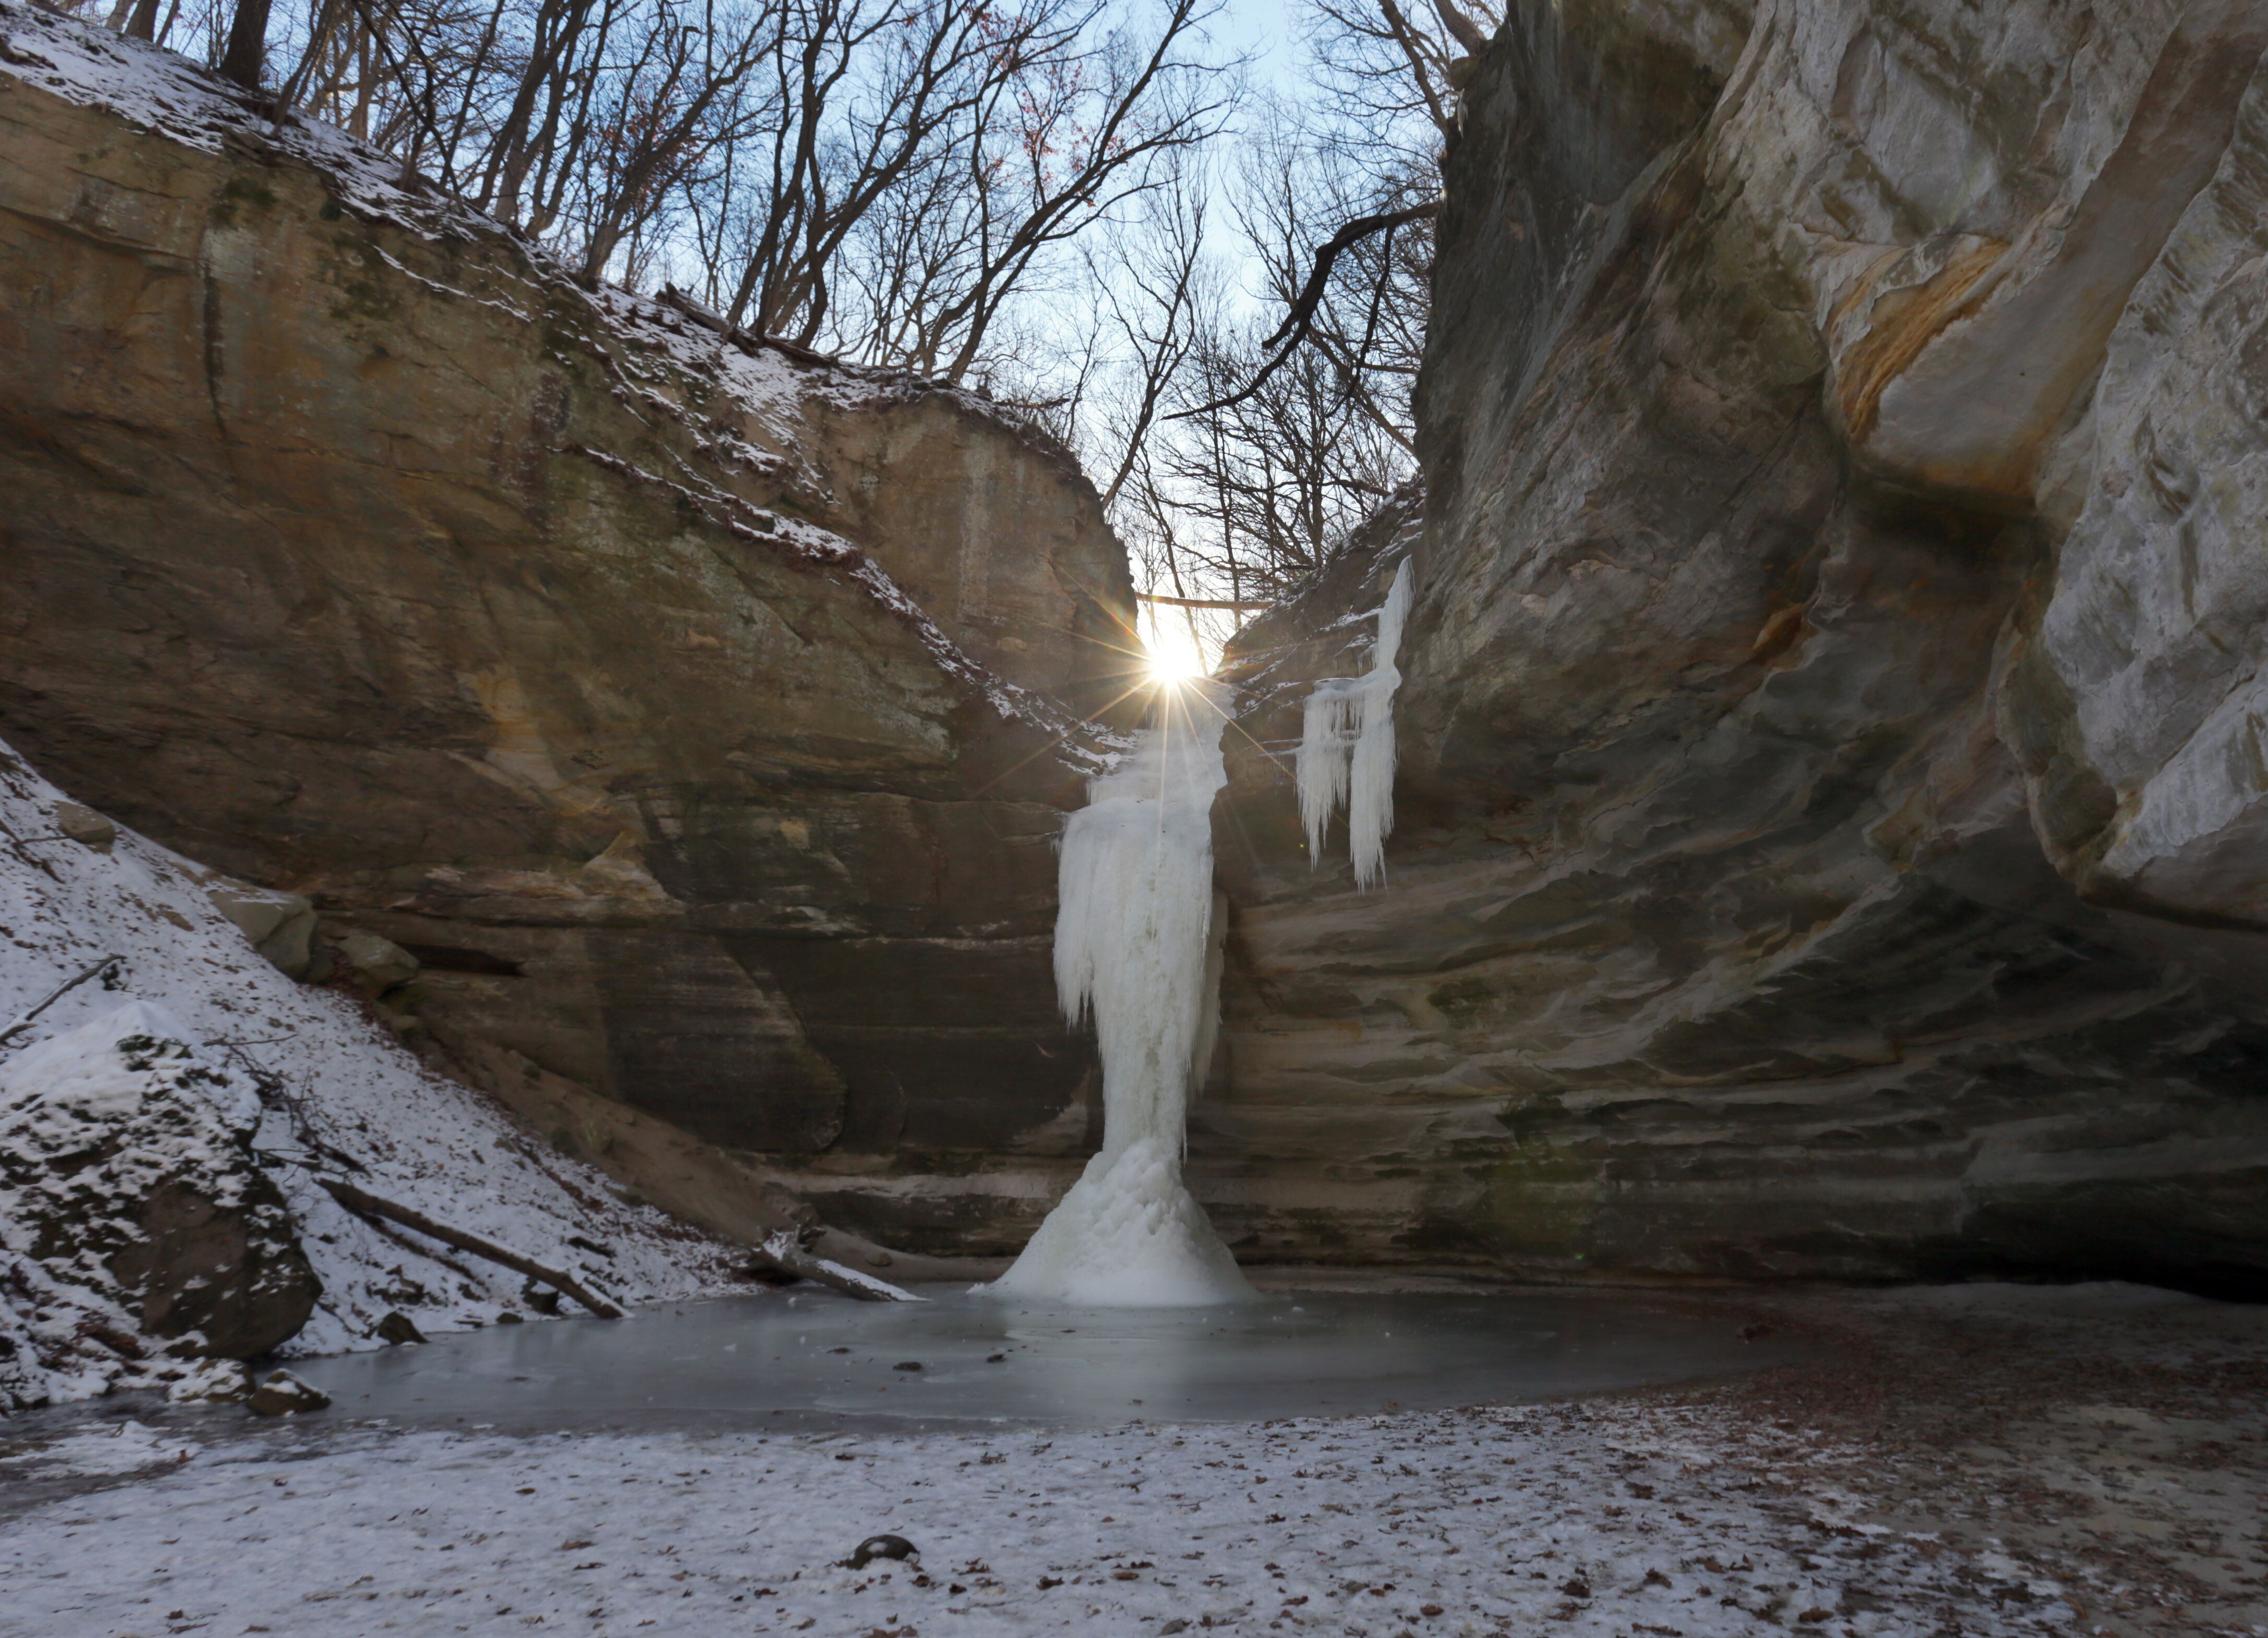 The sun shines above a frozen column waterfall in Ottawa Canyon at Starved Rock State Park on Monday Jan. 10, 2022. Icefalls are forming in nearly every canon in the park. Park staff recommends to be prepared for extremely icy staircases, trails, and canyons if you decide to visit Starved Rock and Matthiessen State Park. Proper footwear with clip ons such as Yak trax and ski poles or hiking sticks will help with balance.